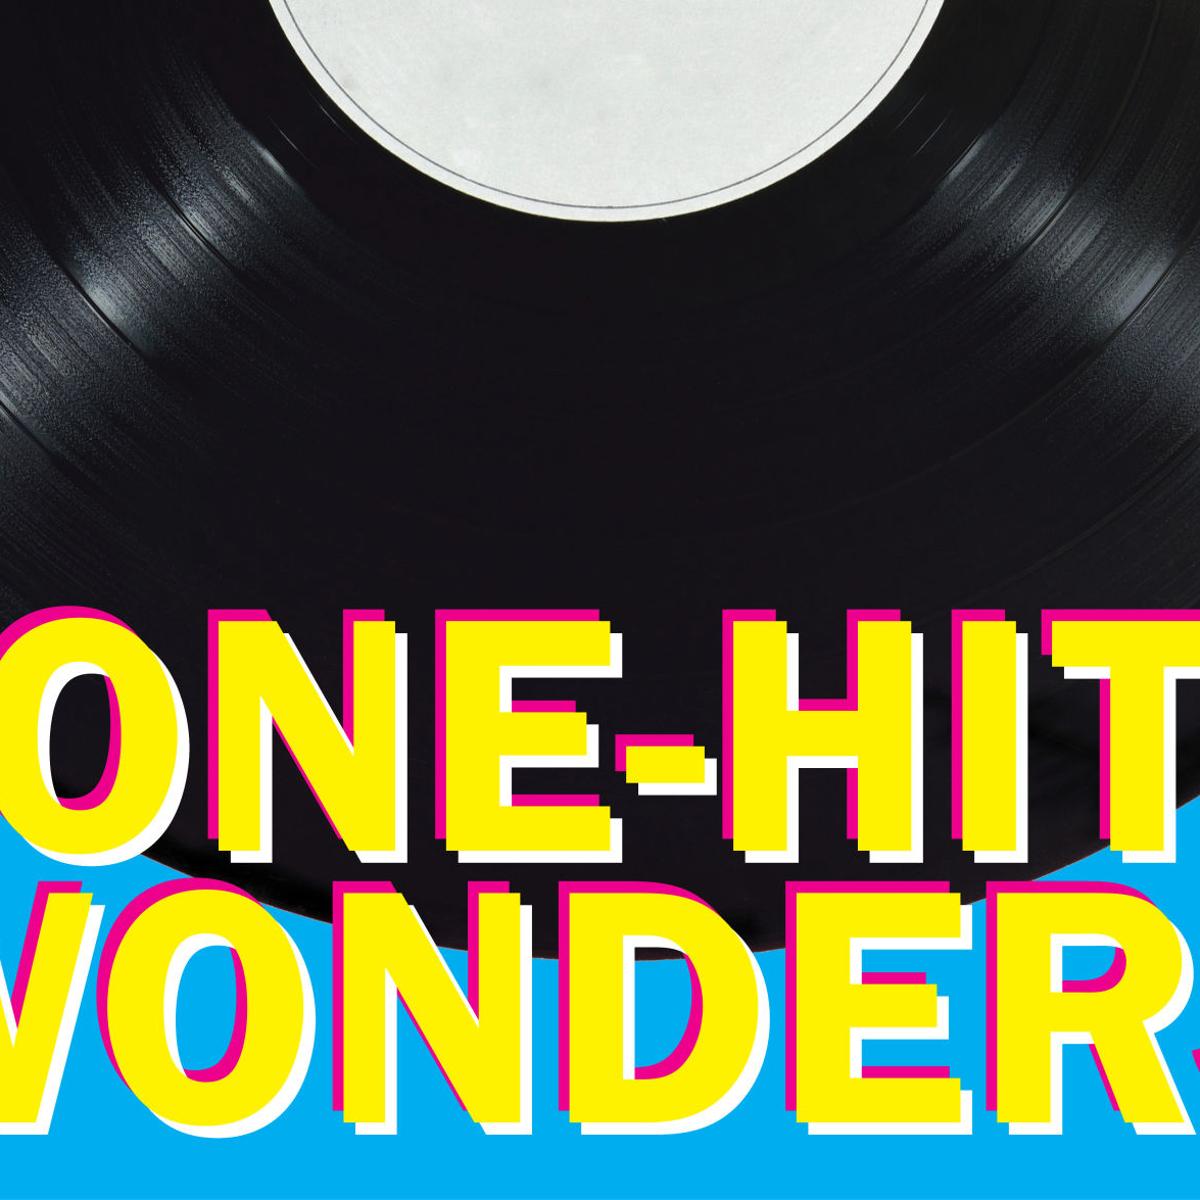 Reader Poll Of All The One Hit Wonders Which One Is No 1